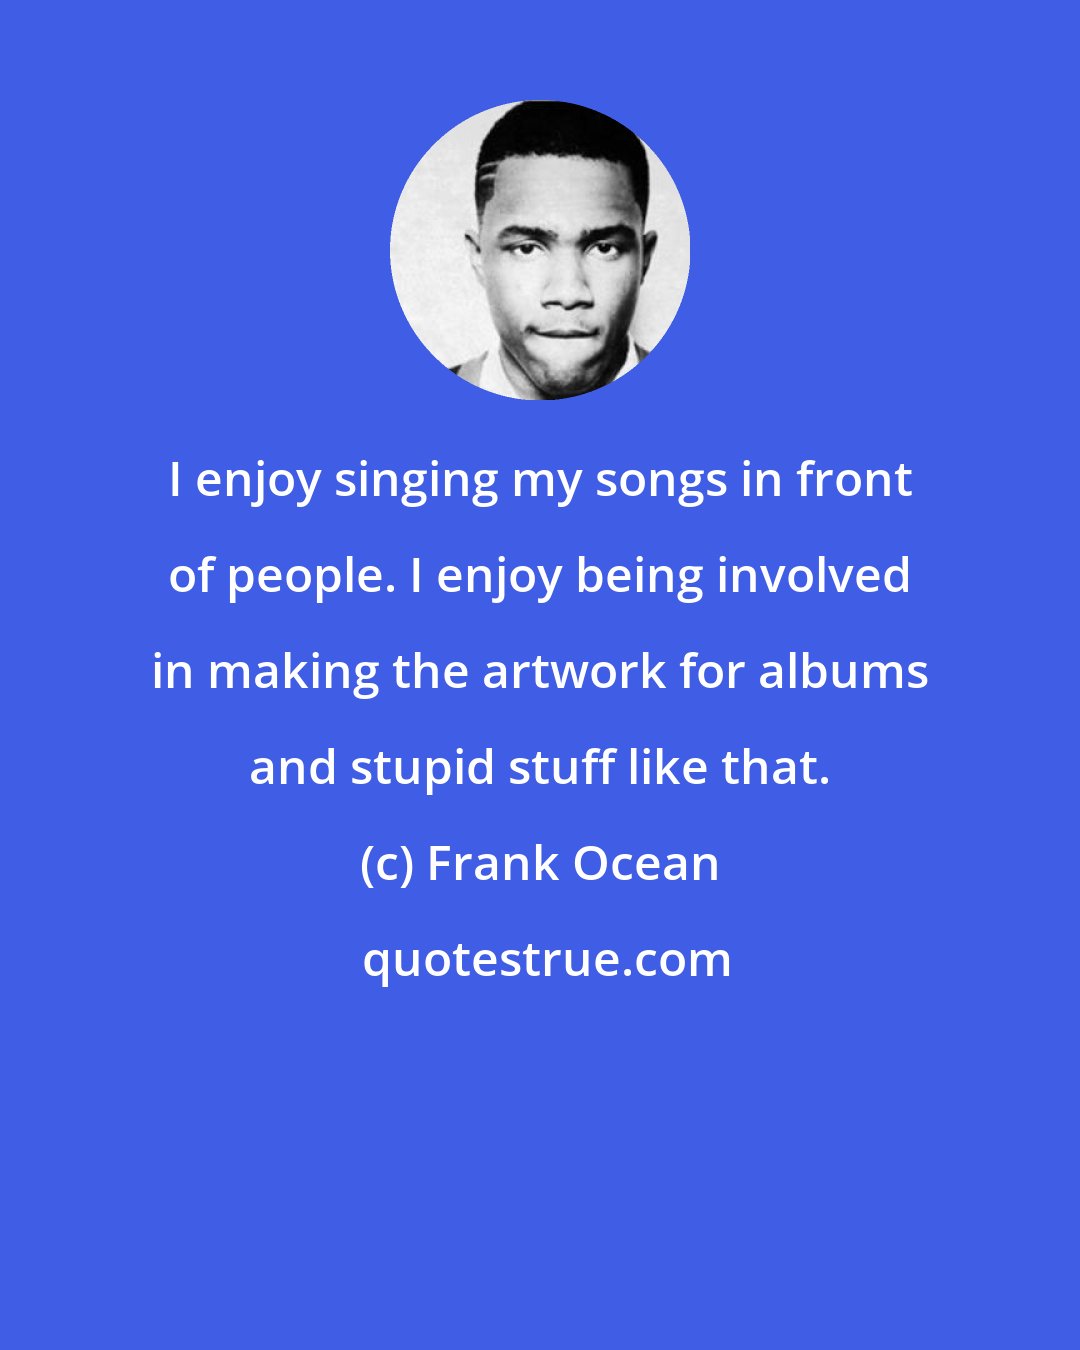 Frank Ocean: I enjoy singing my songs in front of people. I enjoy being involved in making the artwork for albums and stupid stuff like that.